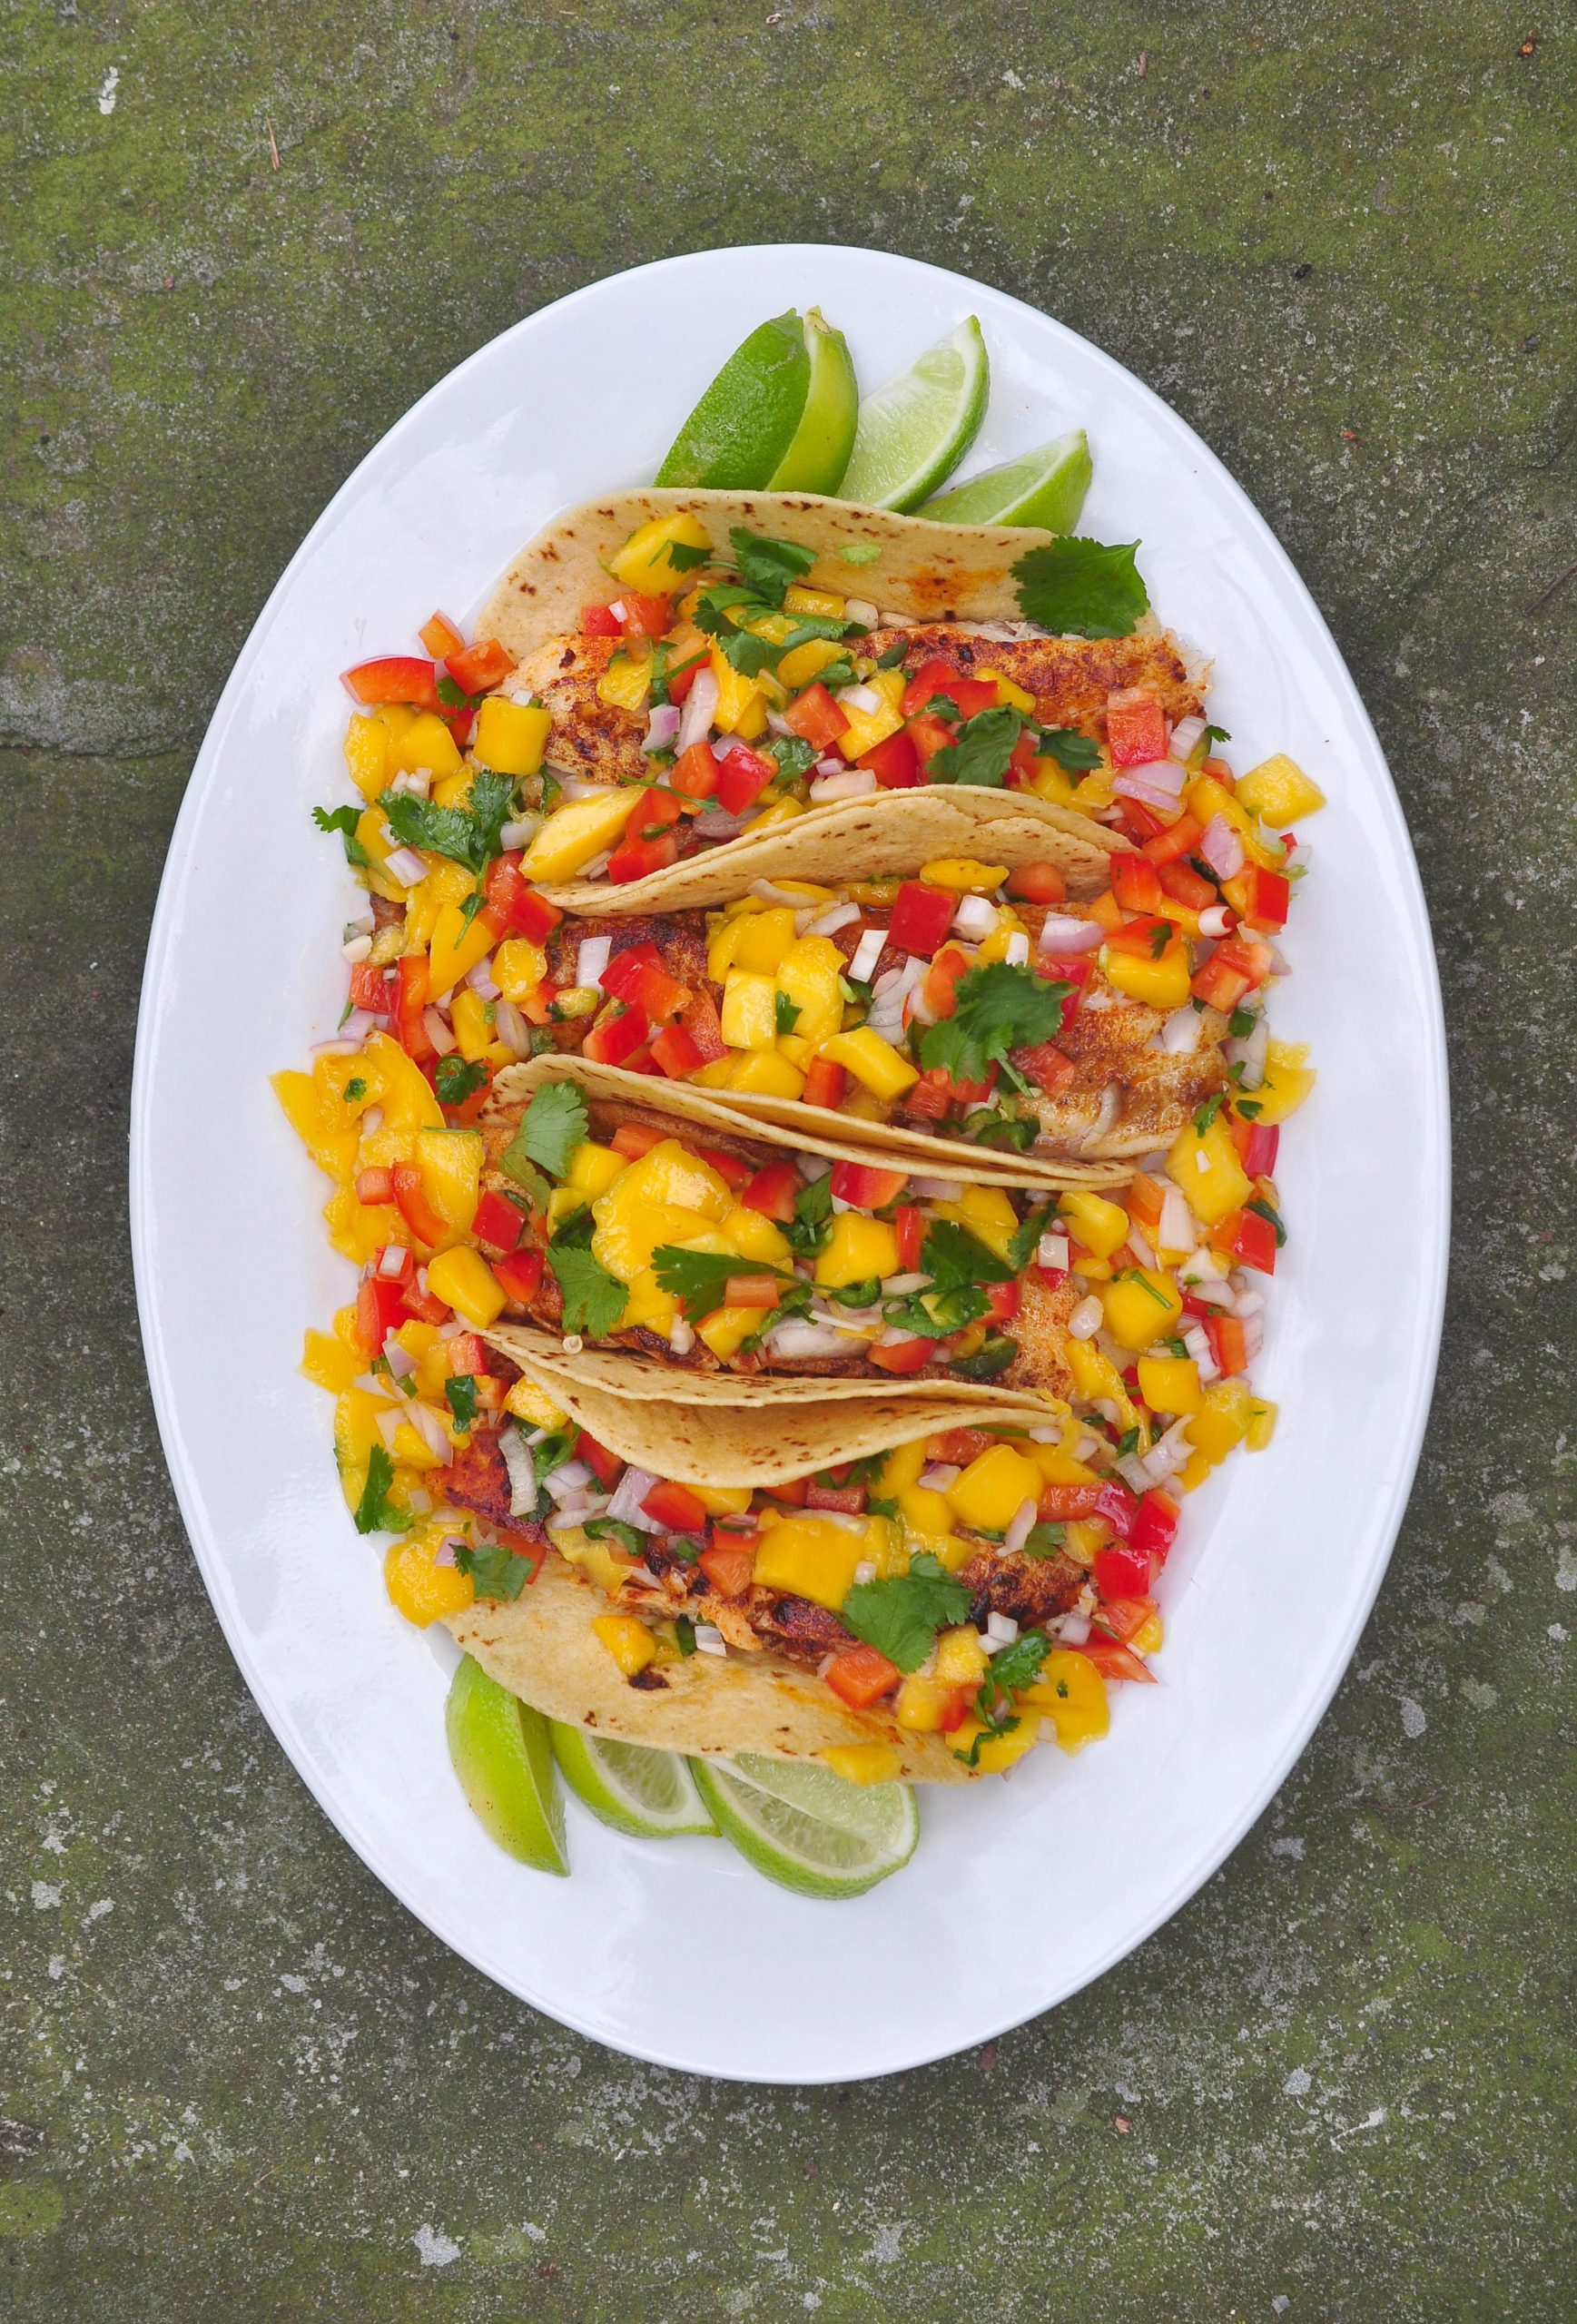 A large white oval platter with 4 tacos full of mango salsa and grilled fish. Lime wedges are nestled under the edges of the tacos. It is full of color, yellow, red and green. The plate rests on a slate background.